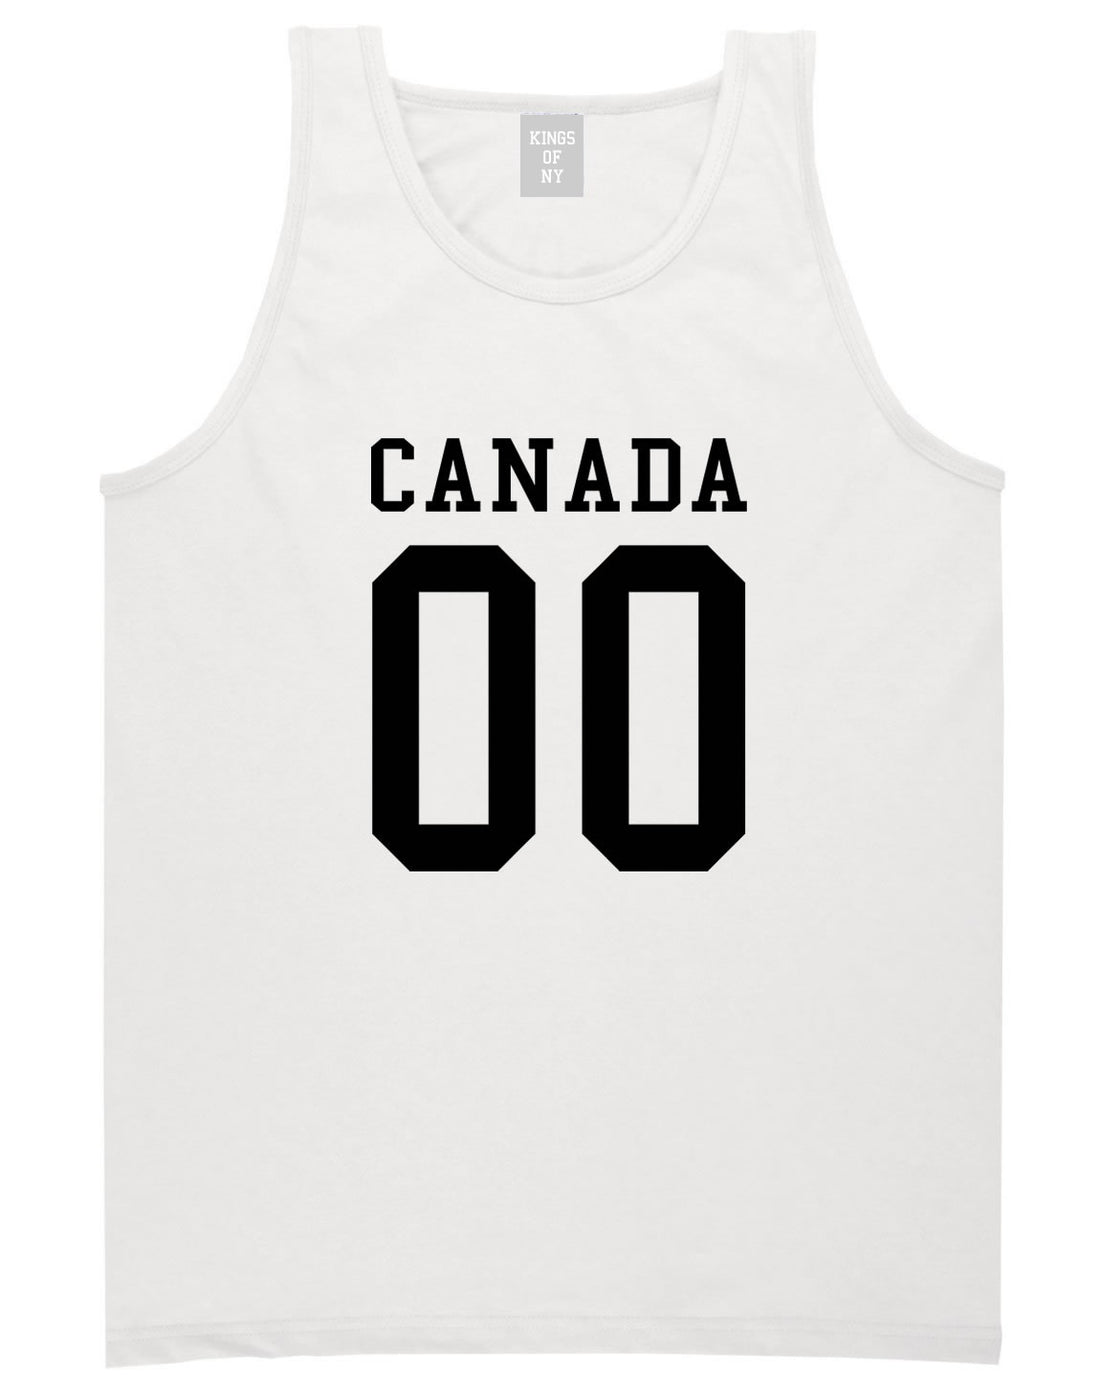 Canada Team 00 Jersey Tank Top in White By Kings Of NY